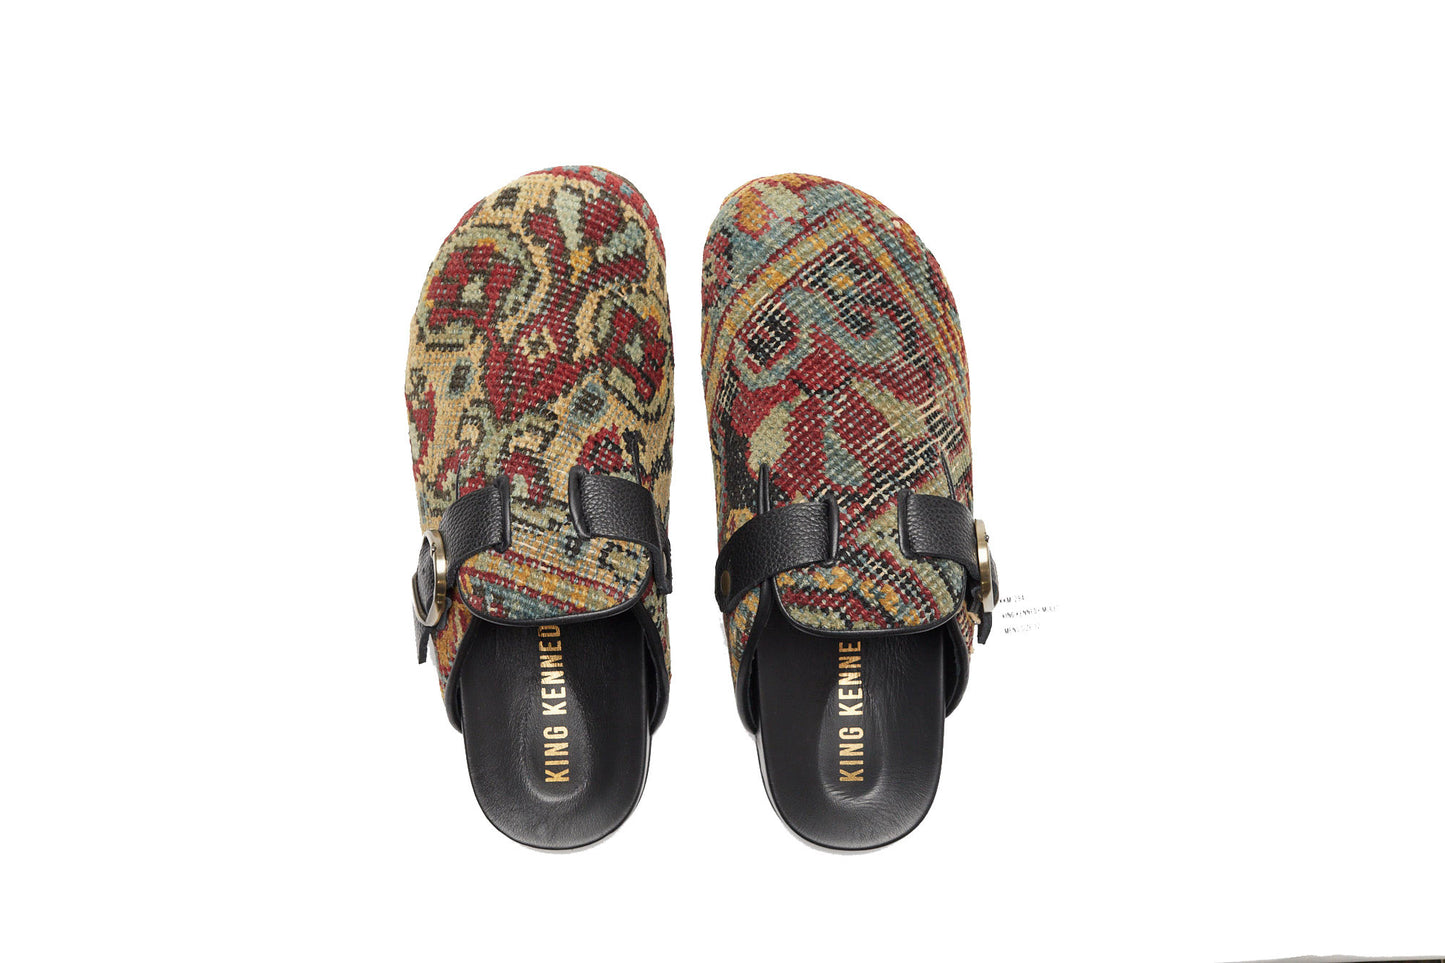 King Kennedy Rug Mules are one-of-a-kind and made of 100 year old antique Persian rug fragments with soft lambskin footbed and comfortable rubber sole. This pair is made of an antique Persian rug with gold, red and faded blue patterns. 